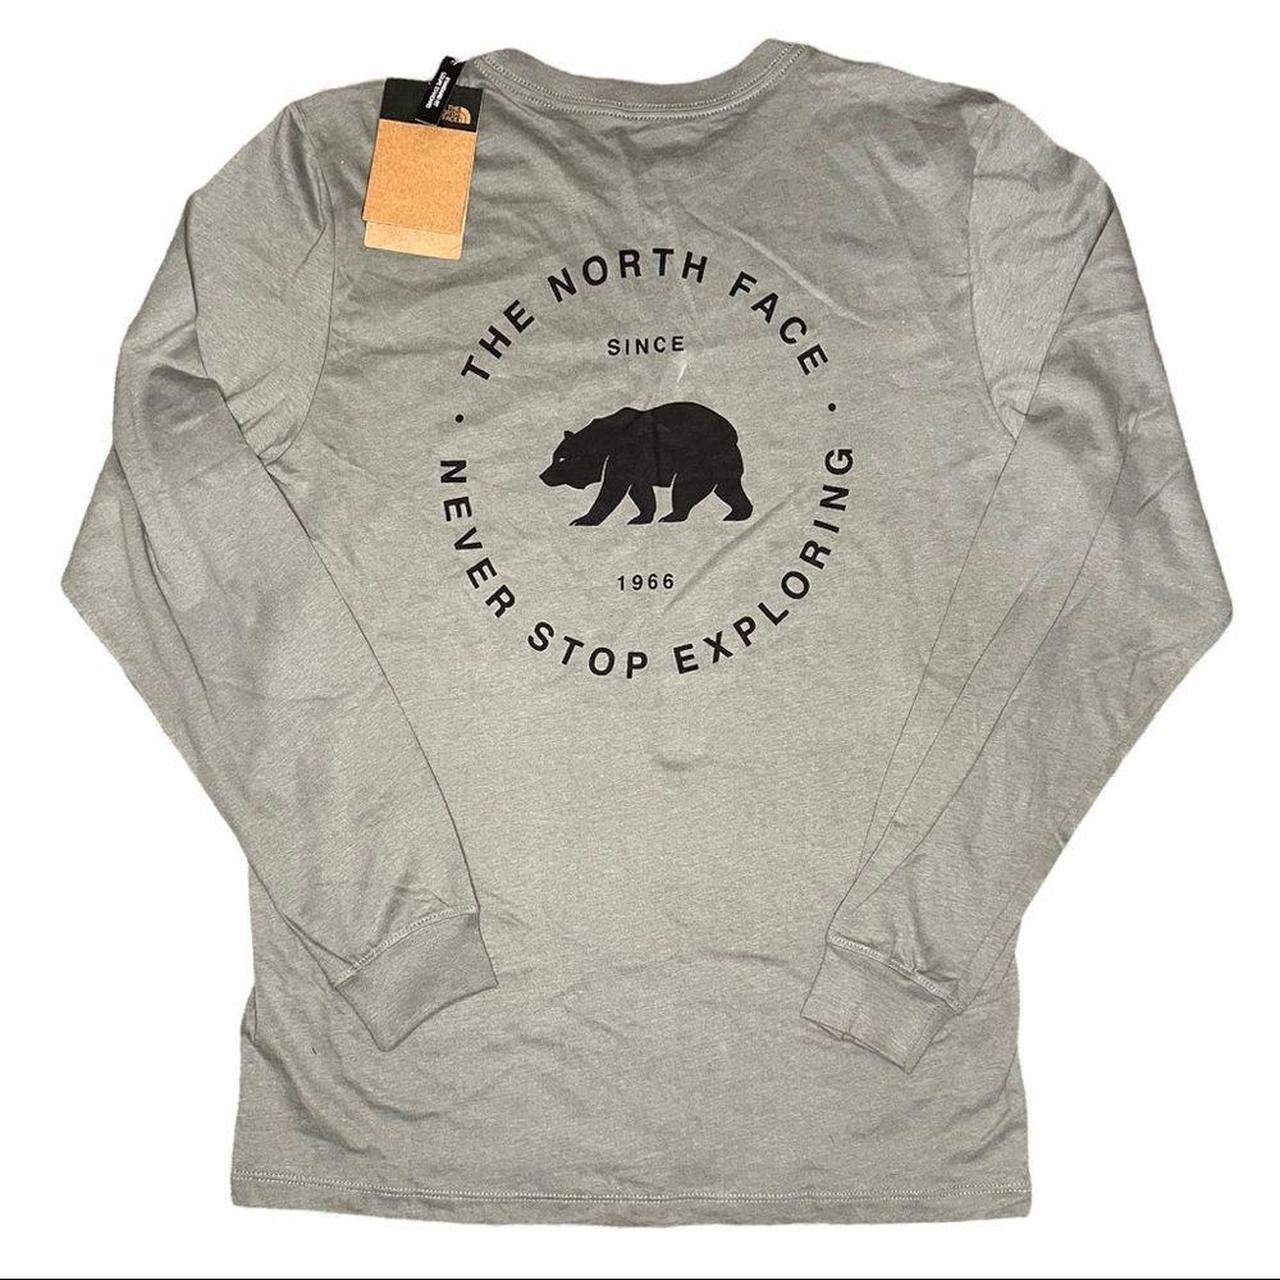 The North Face Throwback Bear Long Sleeve Tee in... - Depop